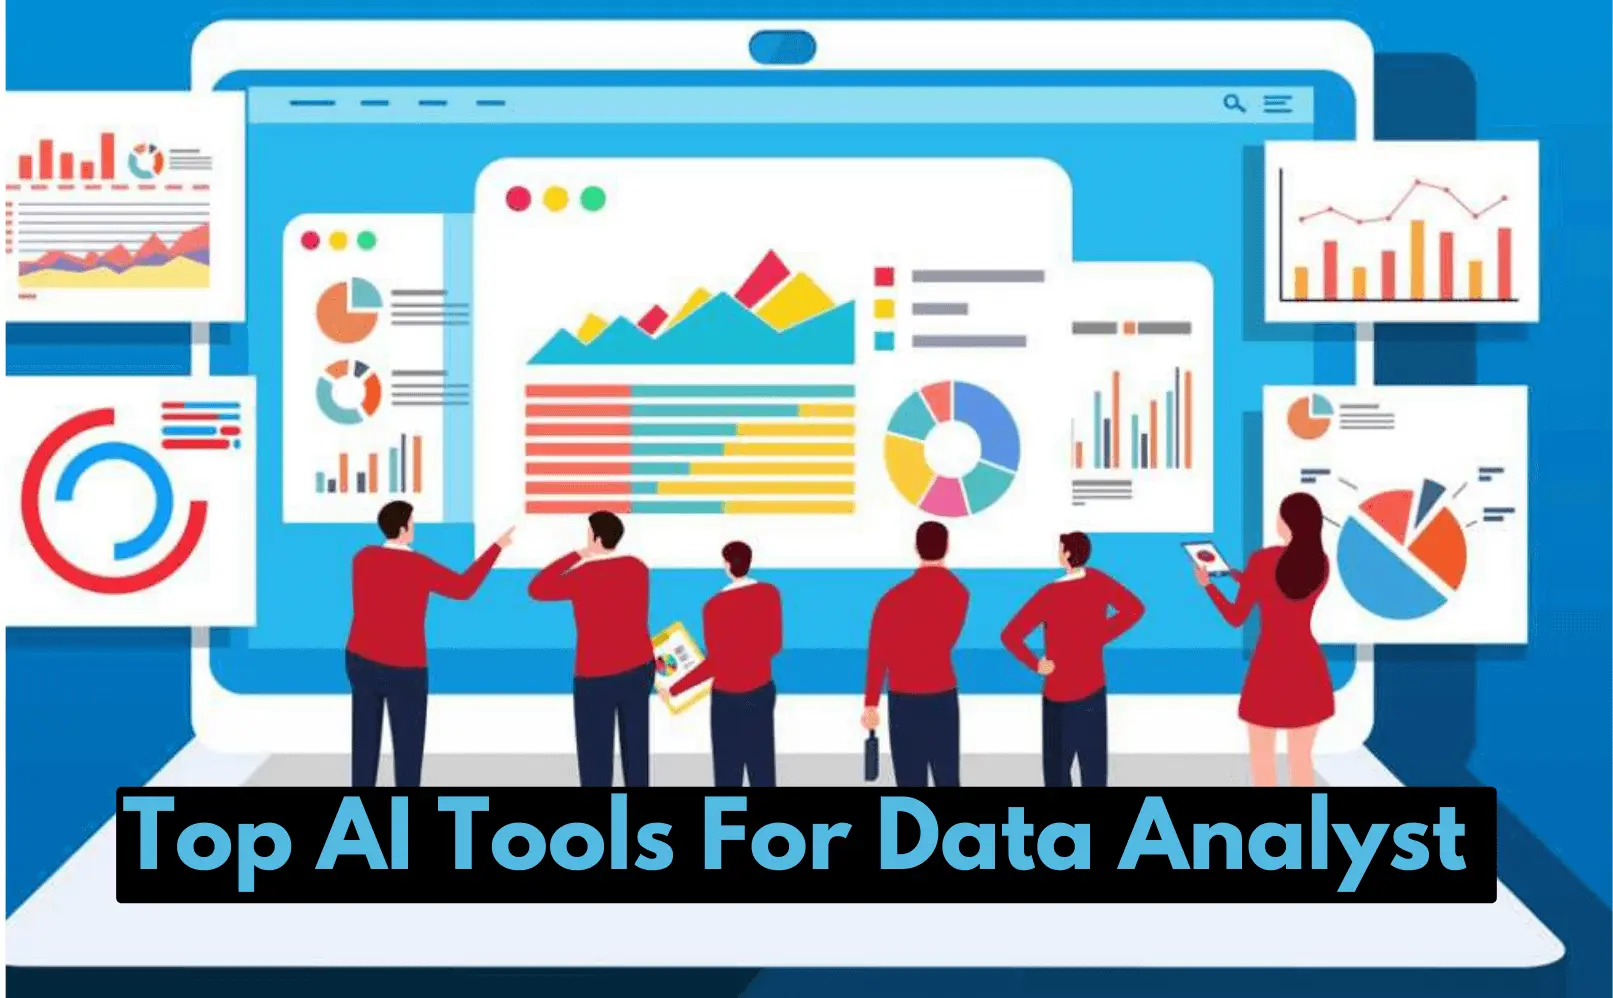 Discover the best AI tools for data analysis that can help you automate insights, pattern recognition, and predictive modeling.